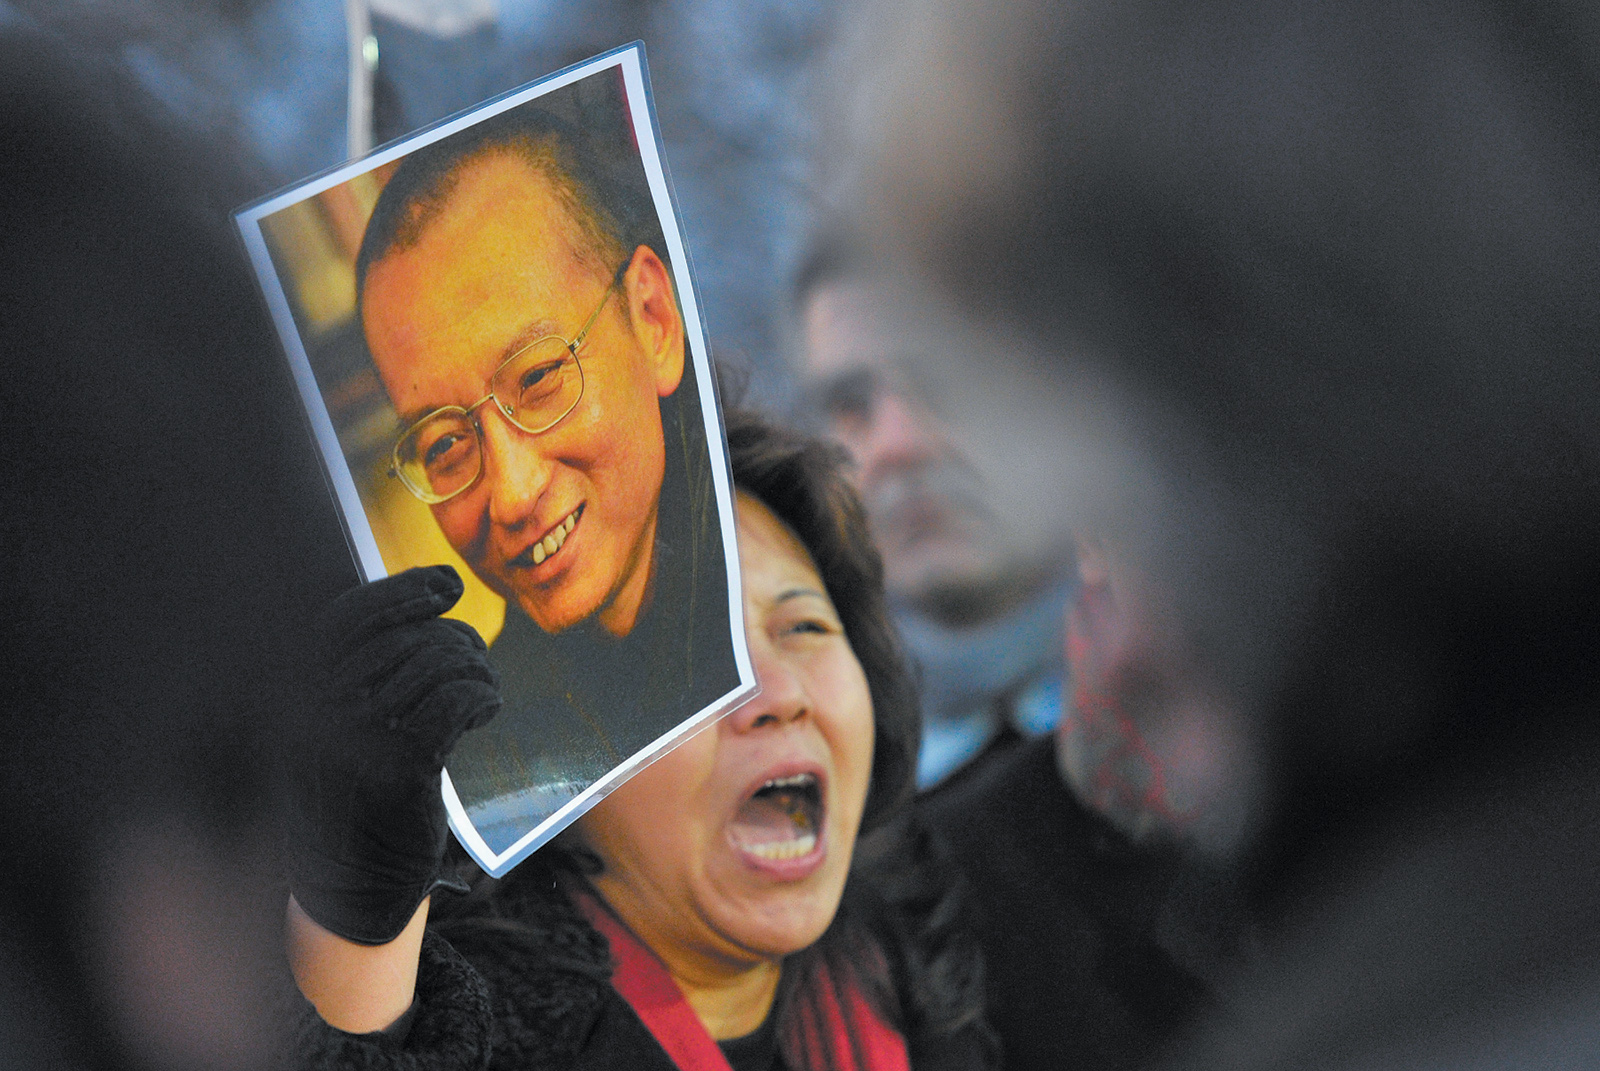 A protester holding an image of the imprisoned Chinese poet and Nobel Peace Prize laureate Liu Xiaobo, Oslo, December 2010